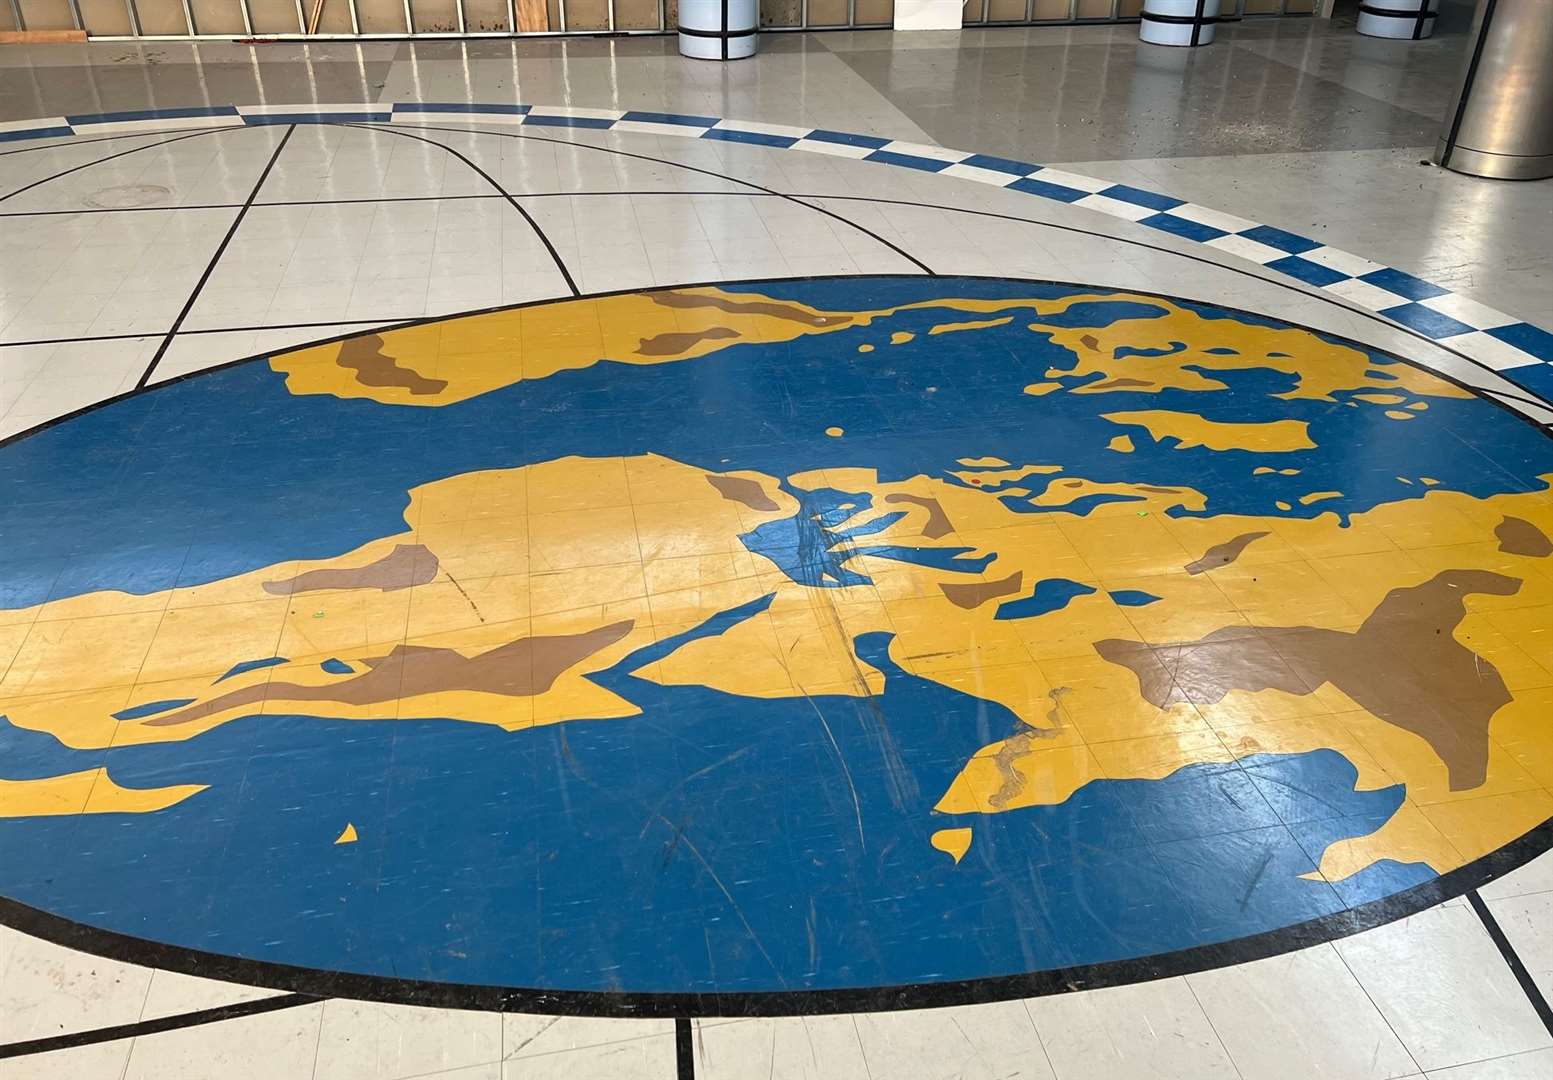 The central 'map of the world' on the floor of the passenger terminal remains